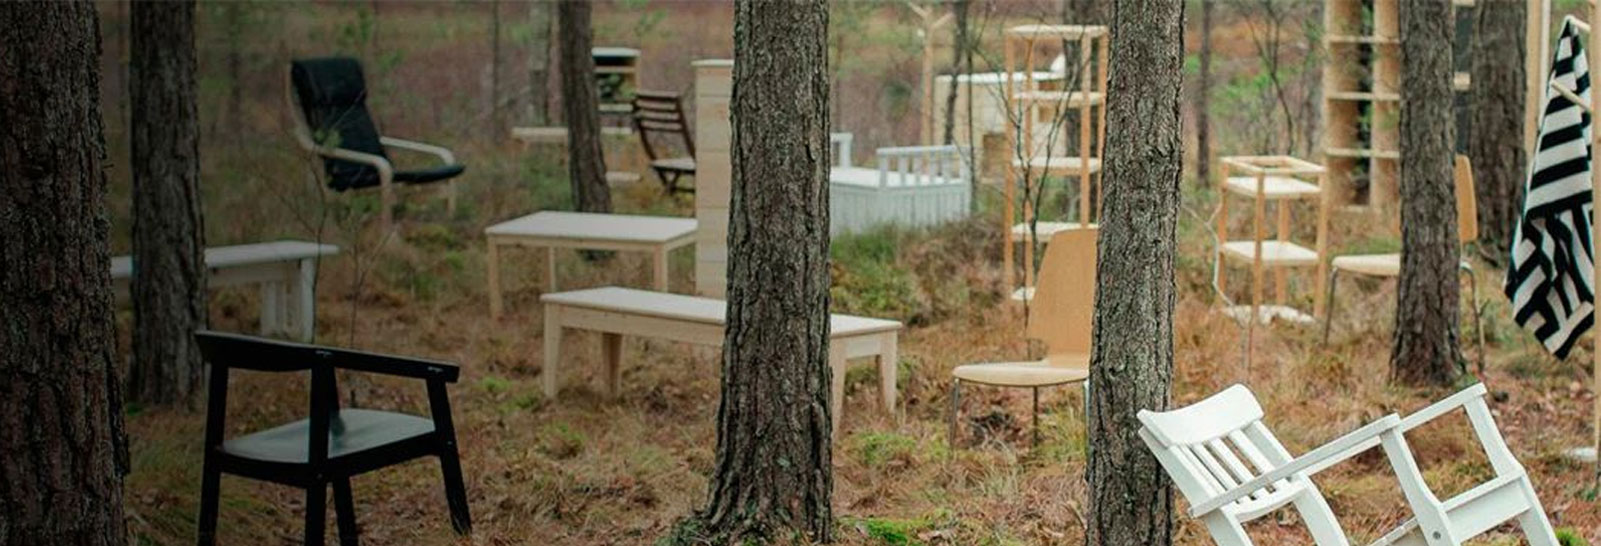 forrest with chairs